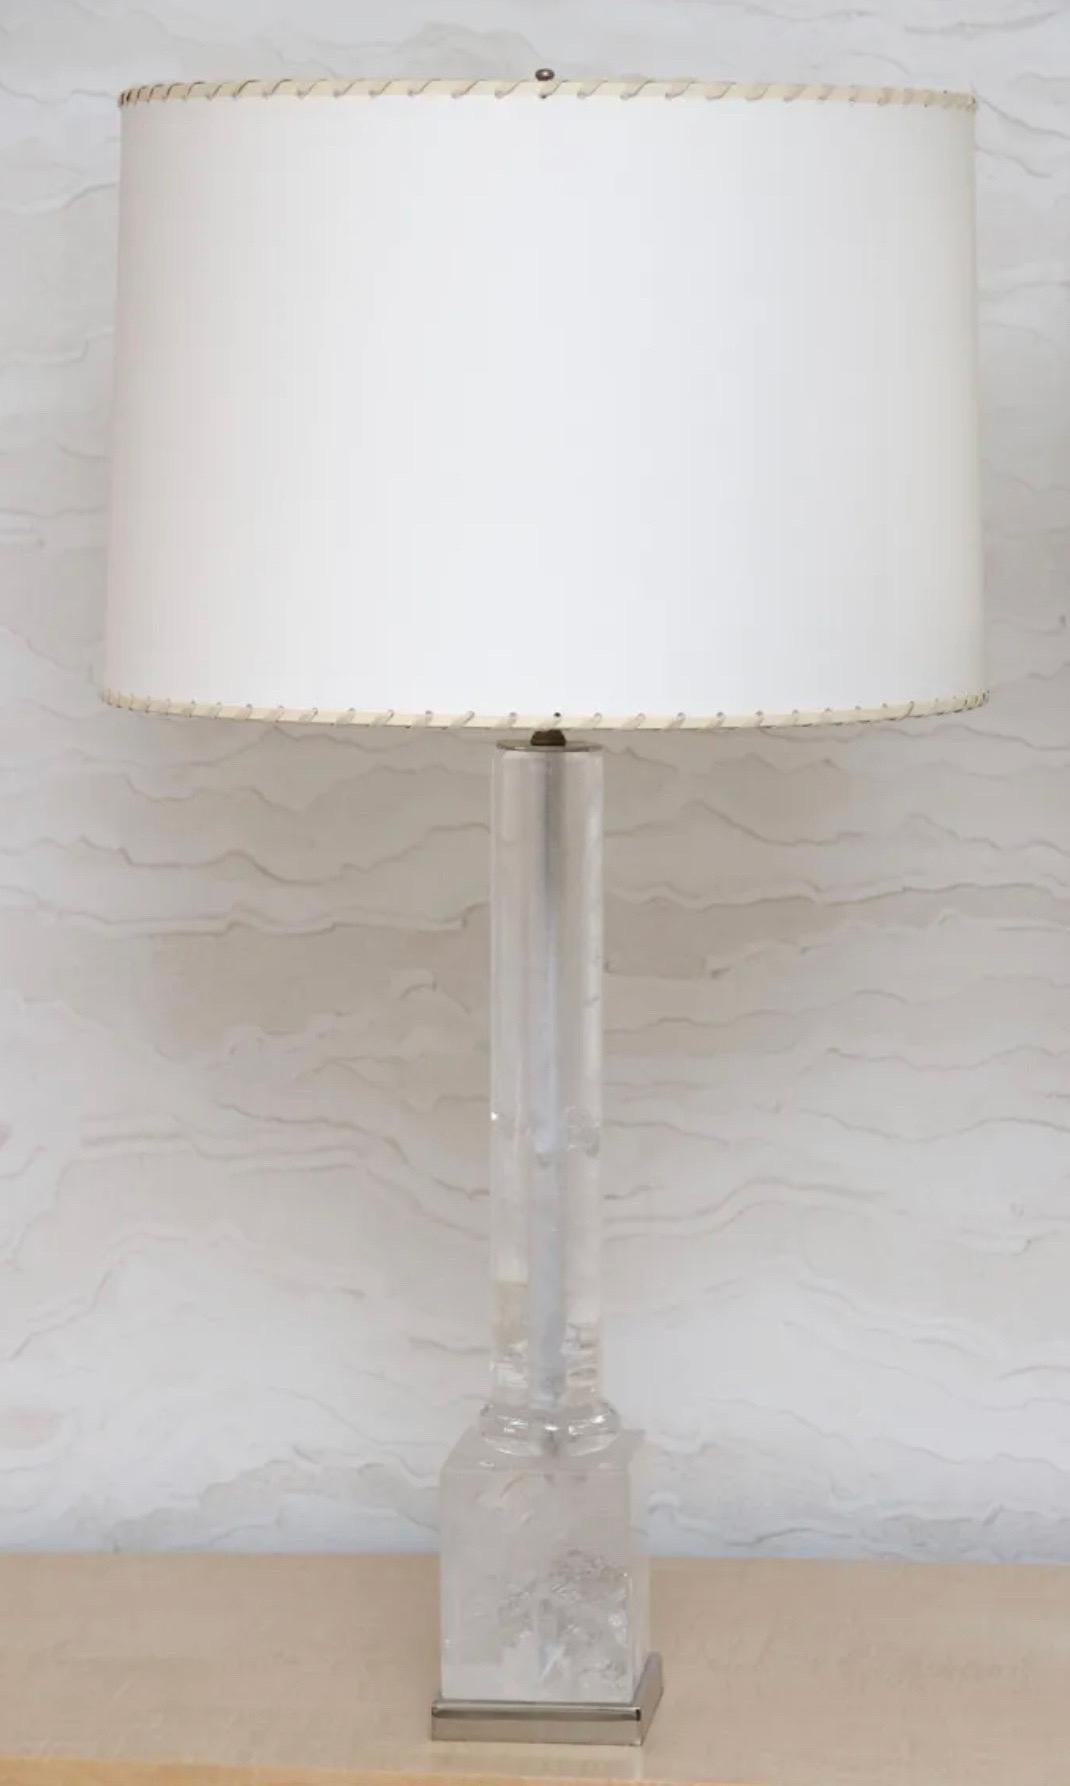 A wonderful pair of rock crystal columnar form lamps in the manner of Maison Baguès with square form rock crystal base supported by a square form polished nickel base. Each lamp includes a round faux suede lamp shade with stitching accent trim on